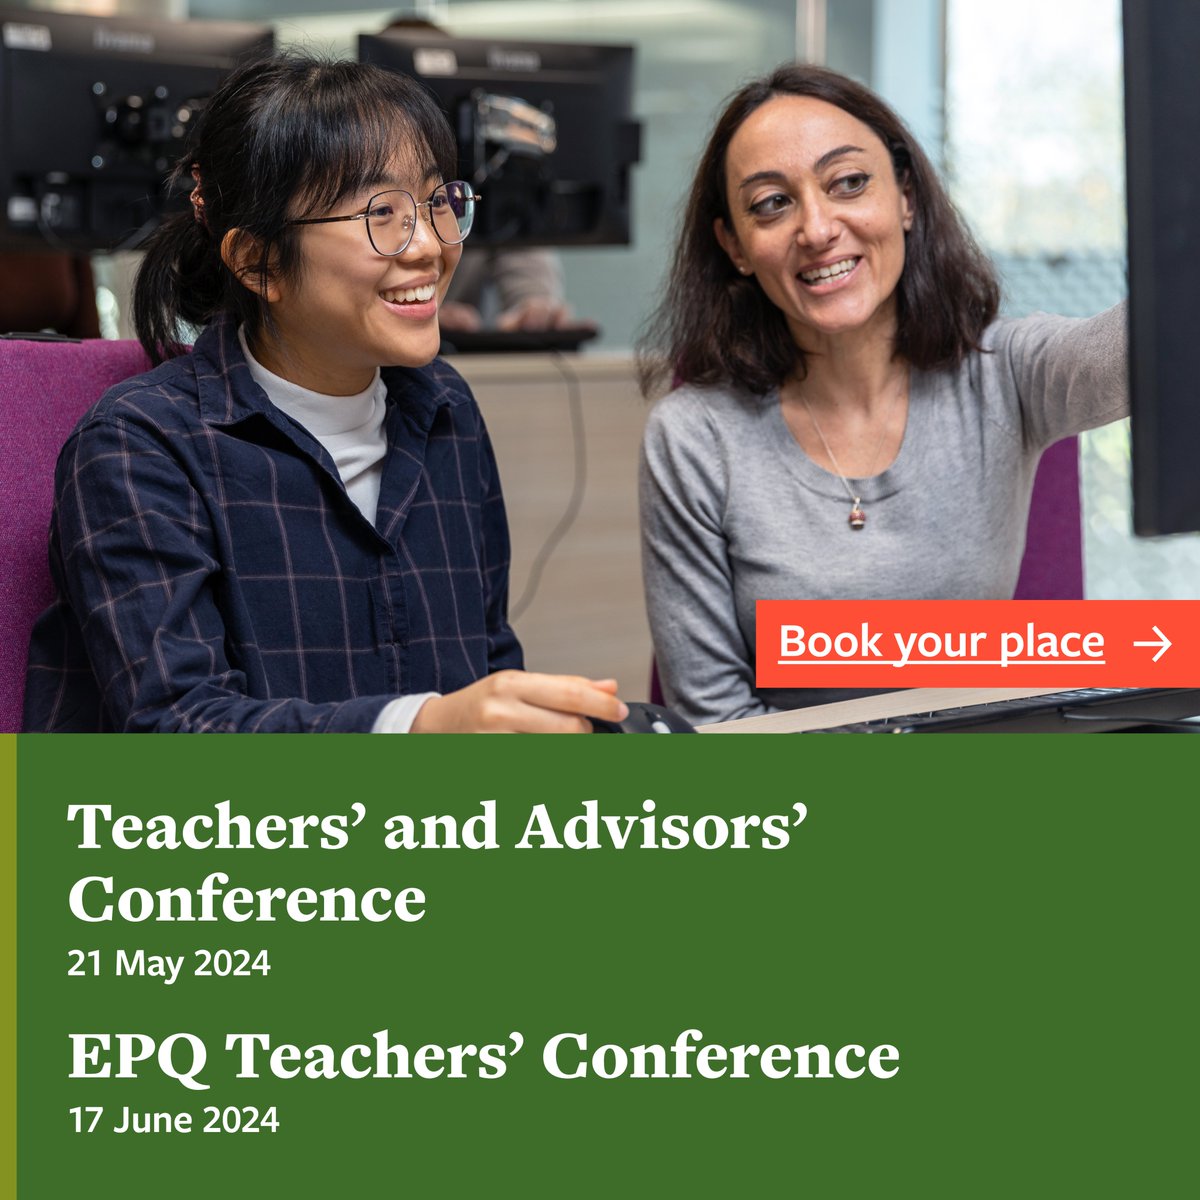 Don't miss your chance to apply for our annual Teachers' and Advisors' Conference in May. A Great opportunity to see how we're supporting the widening participation agenda. leeds.ac.uk/undergraduate-… #teacherconference #careers #HigherEducation #teachers